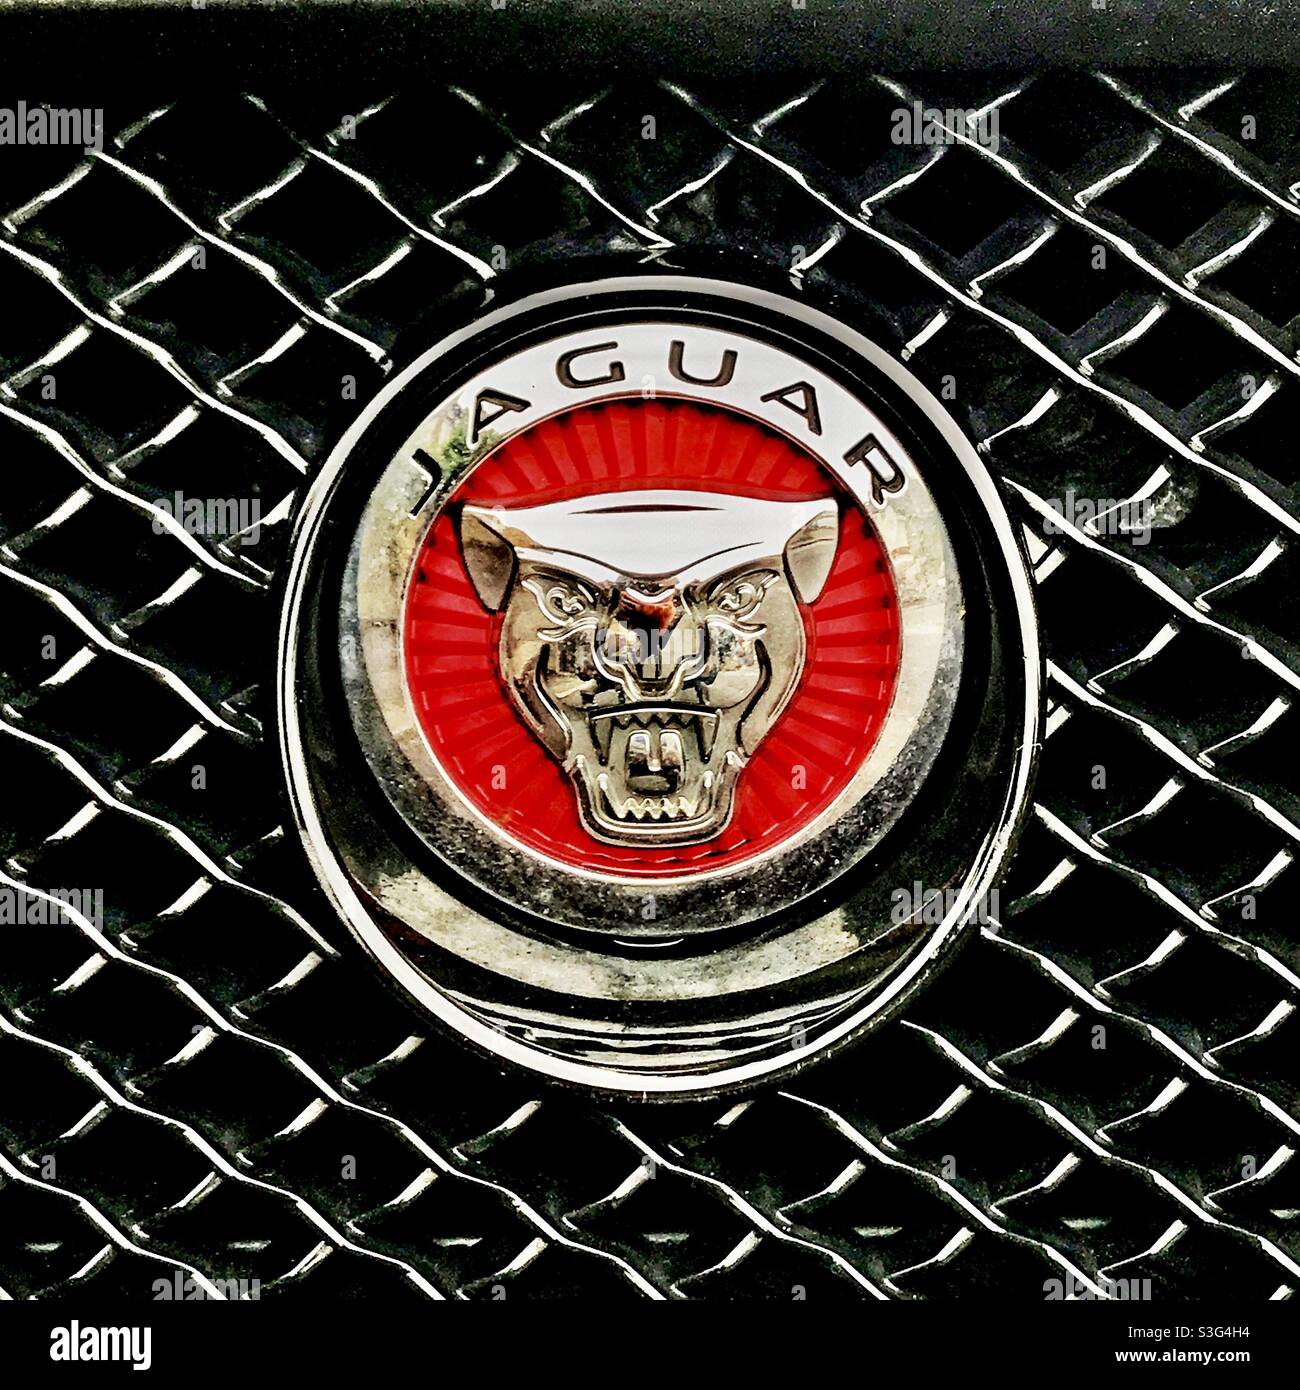 Cool and iconic Jaguar motors logo on a car grille. Stock Photo